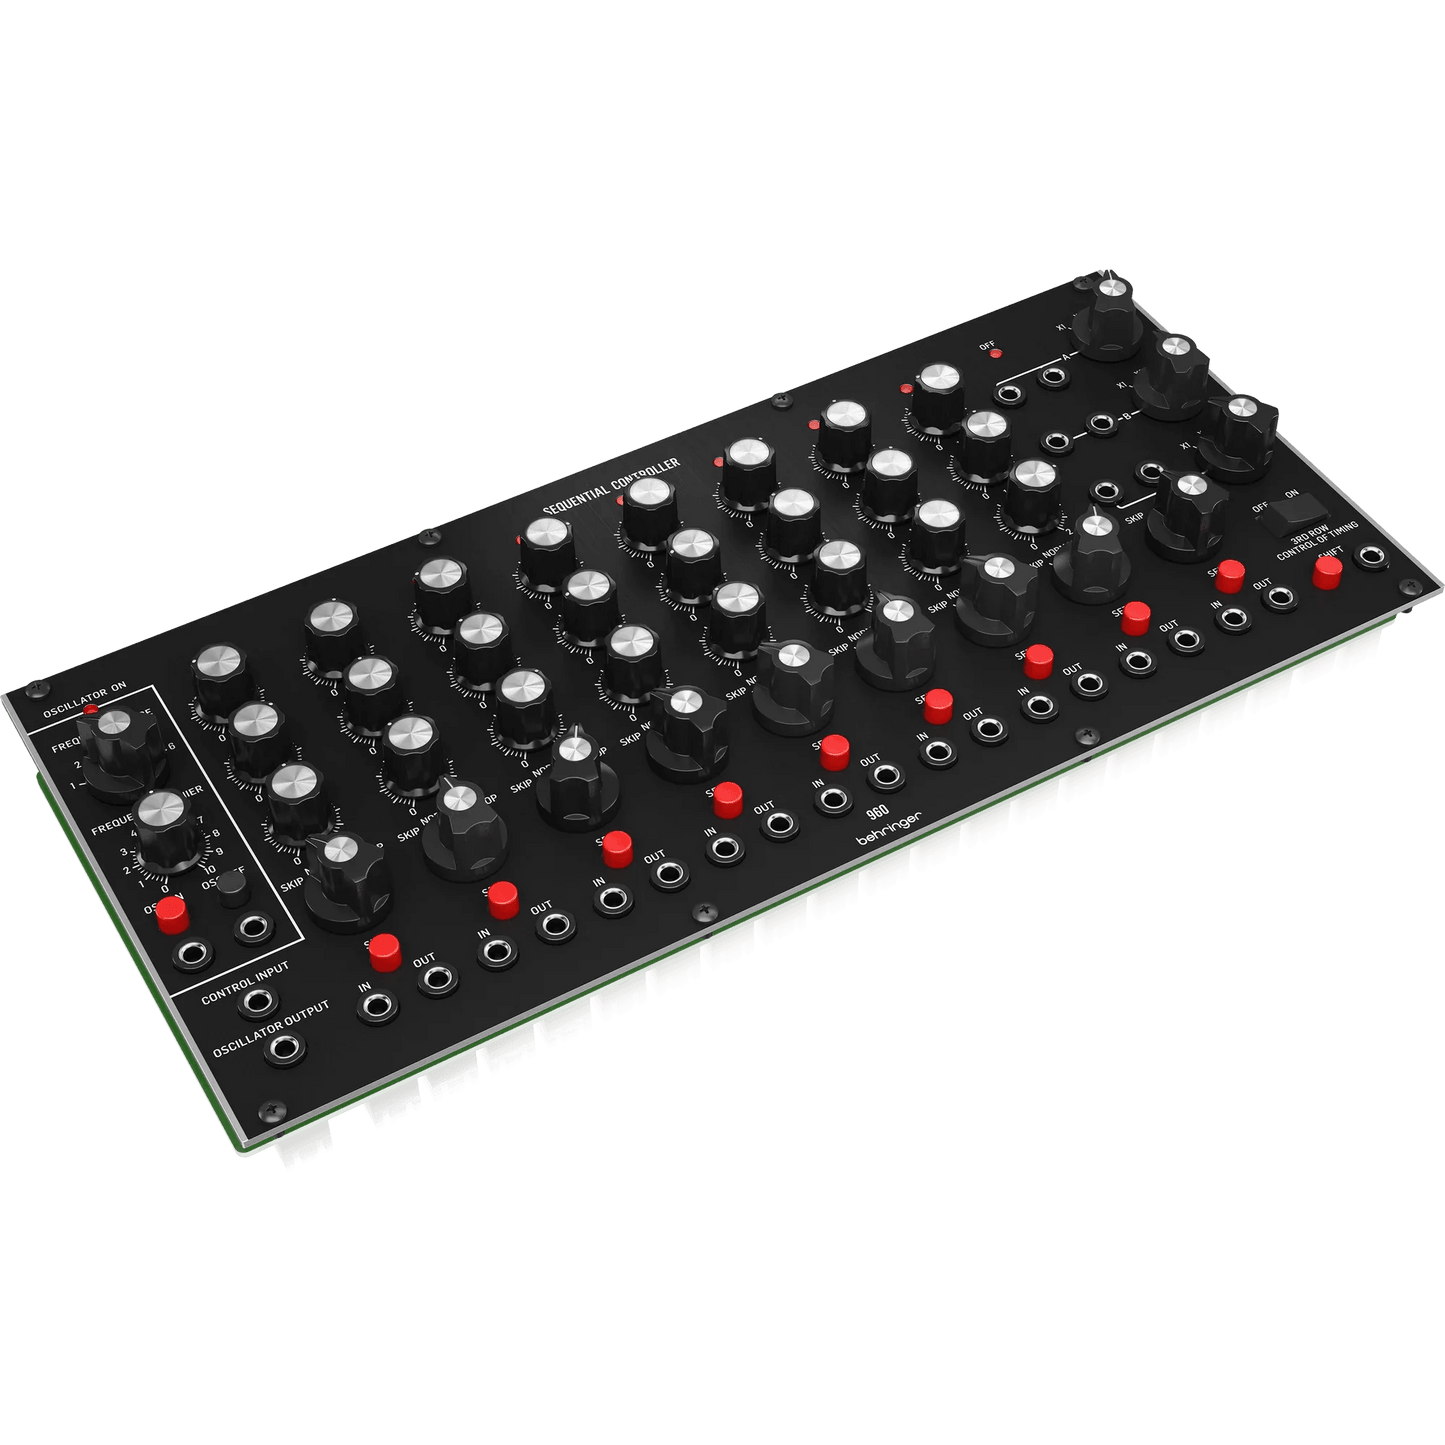 Behringer 960 SEQUENTIAL CONTROLLER